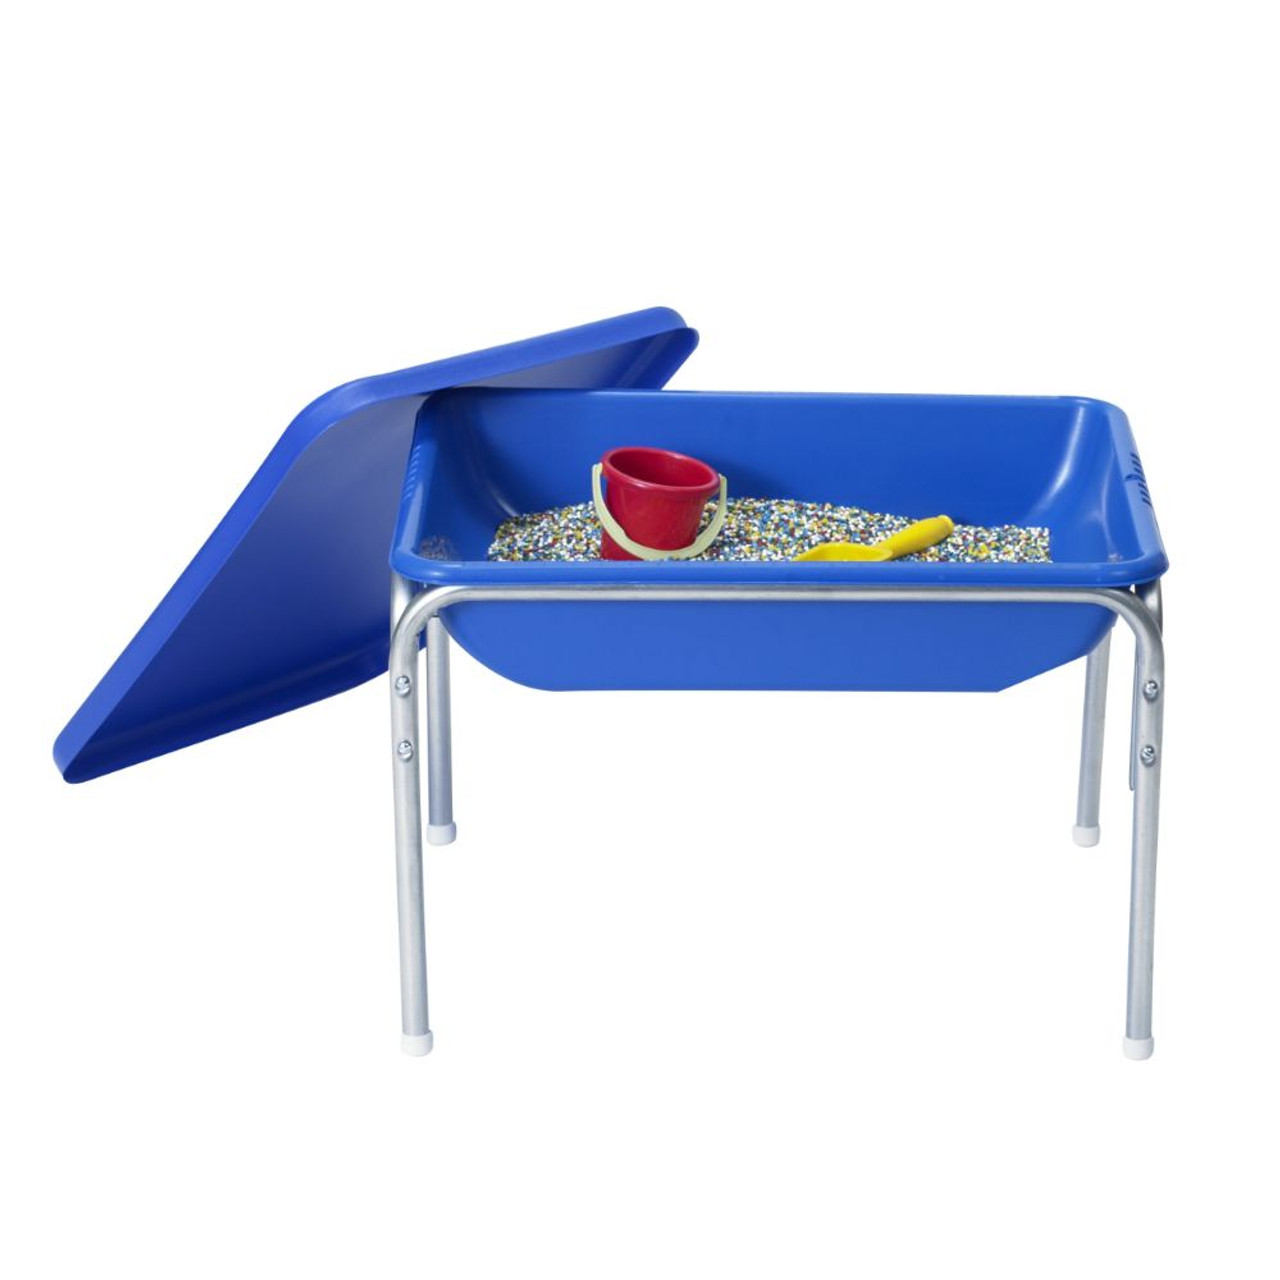 Small Sensory Table and Lid Set - open